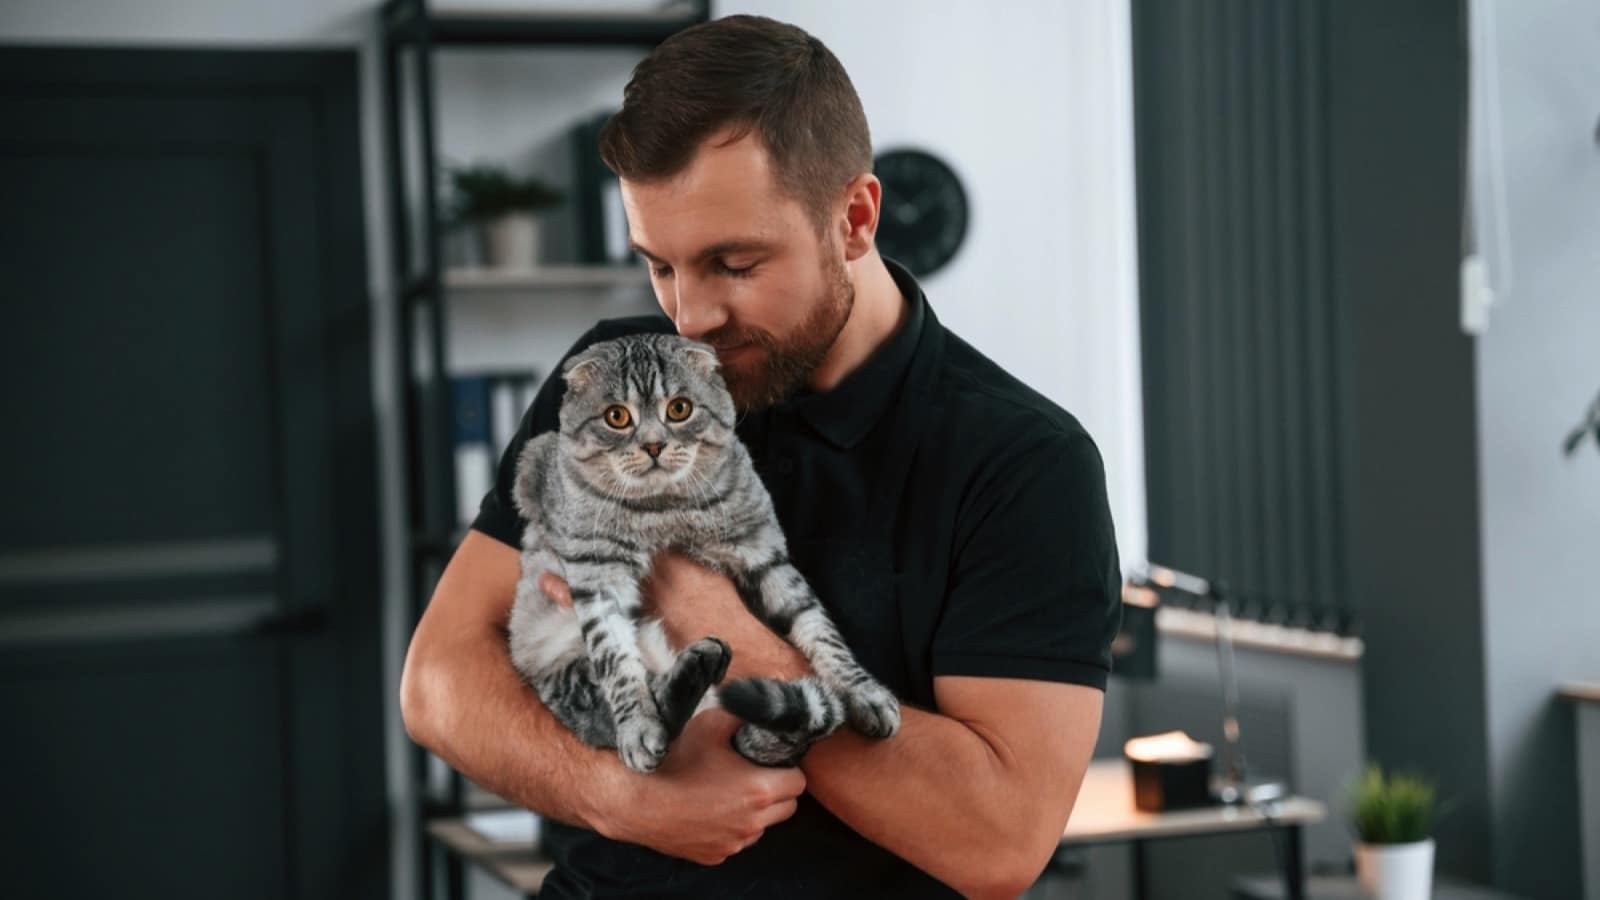 Man holding cat in hand